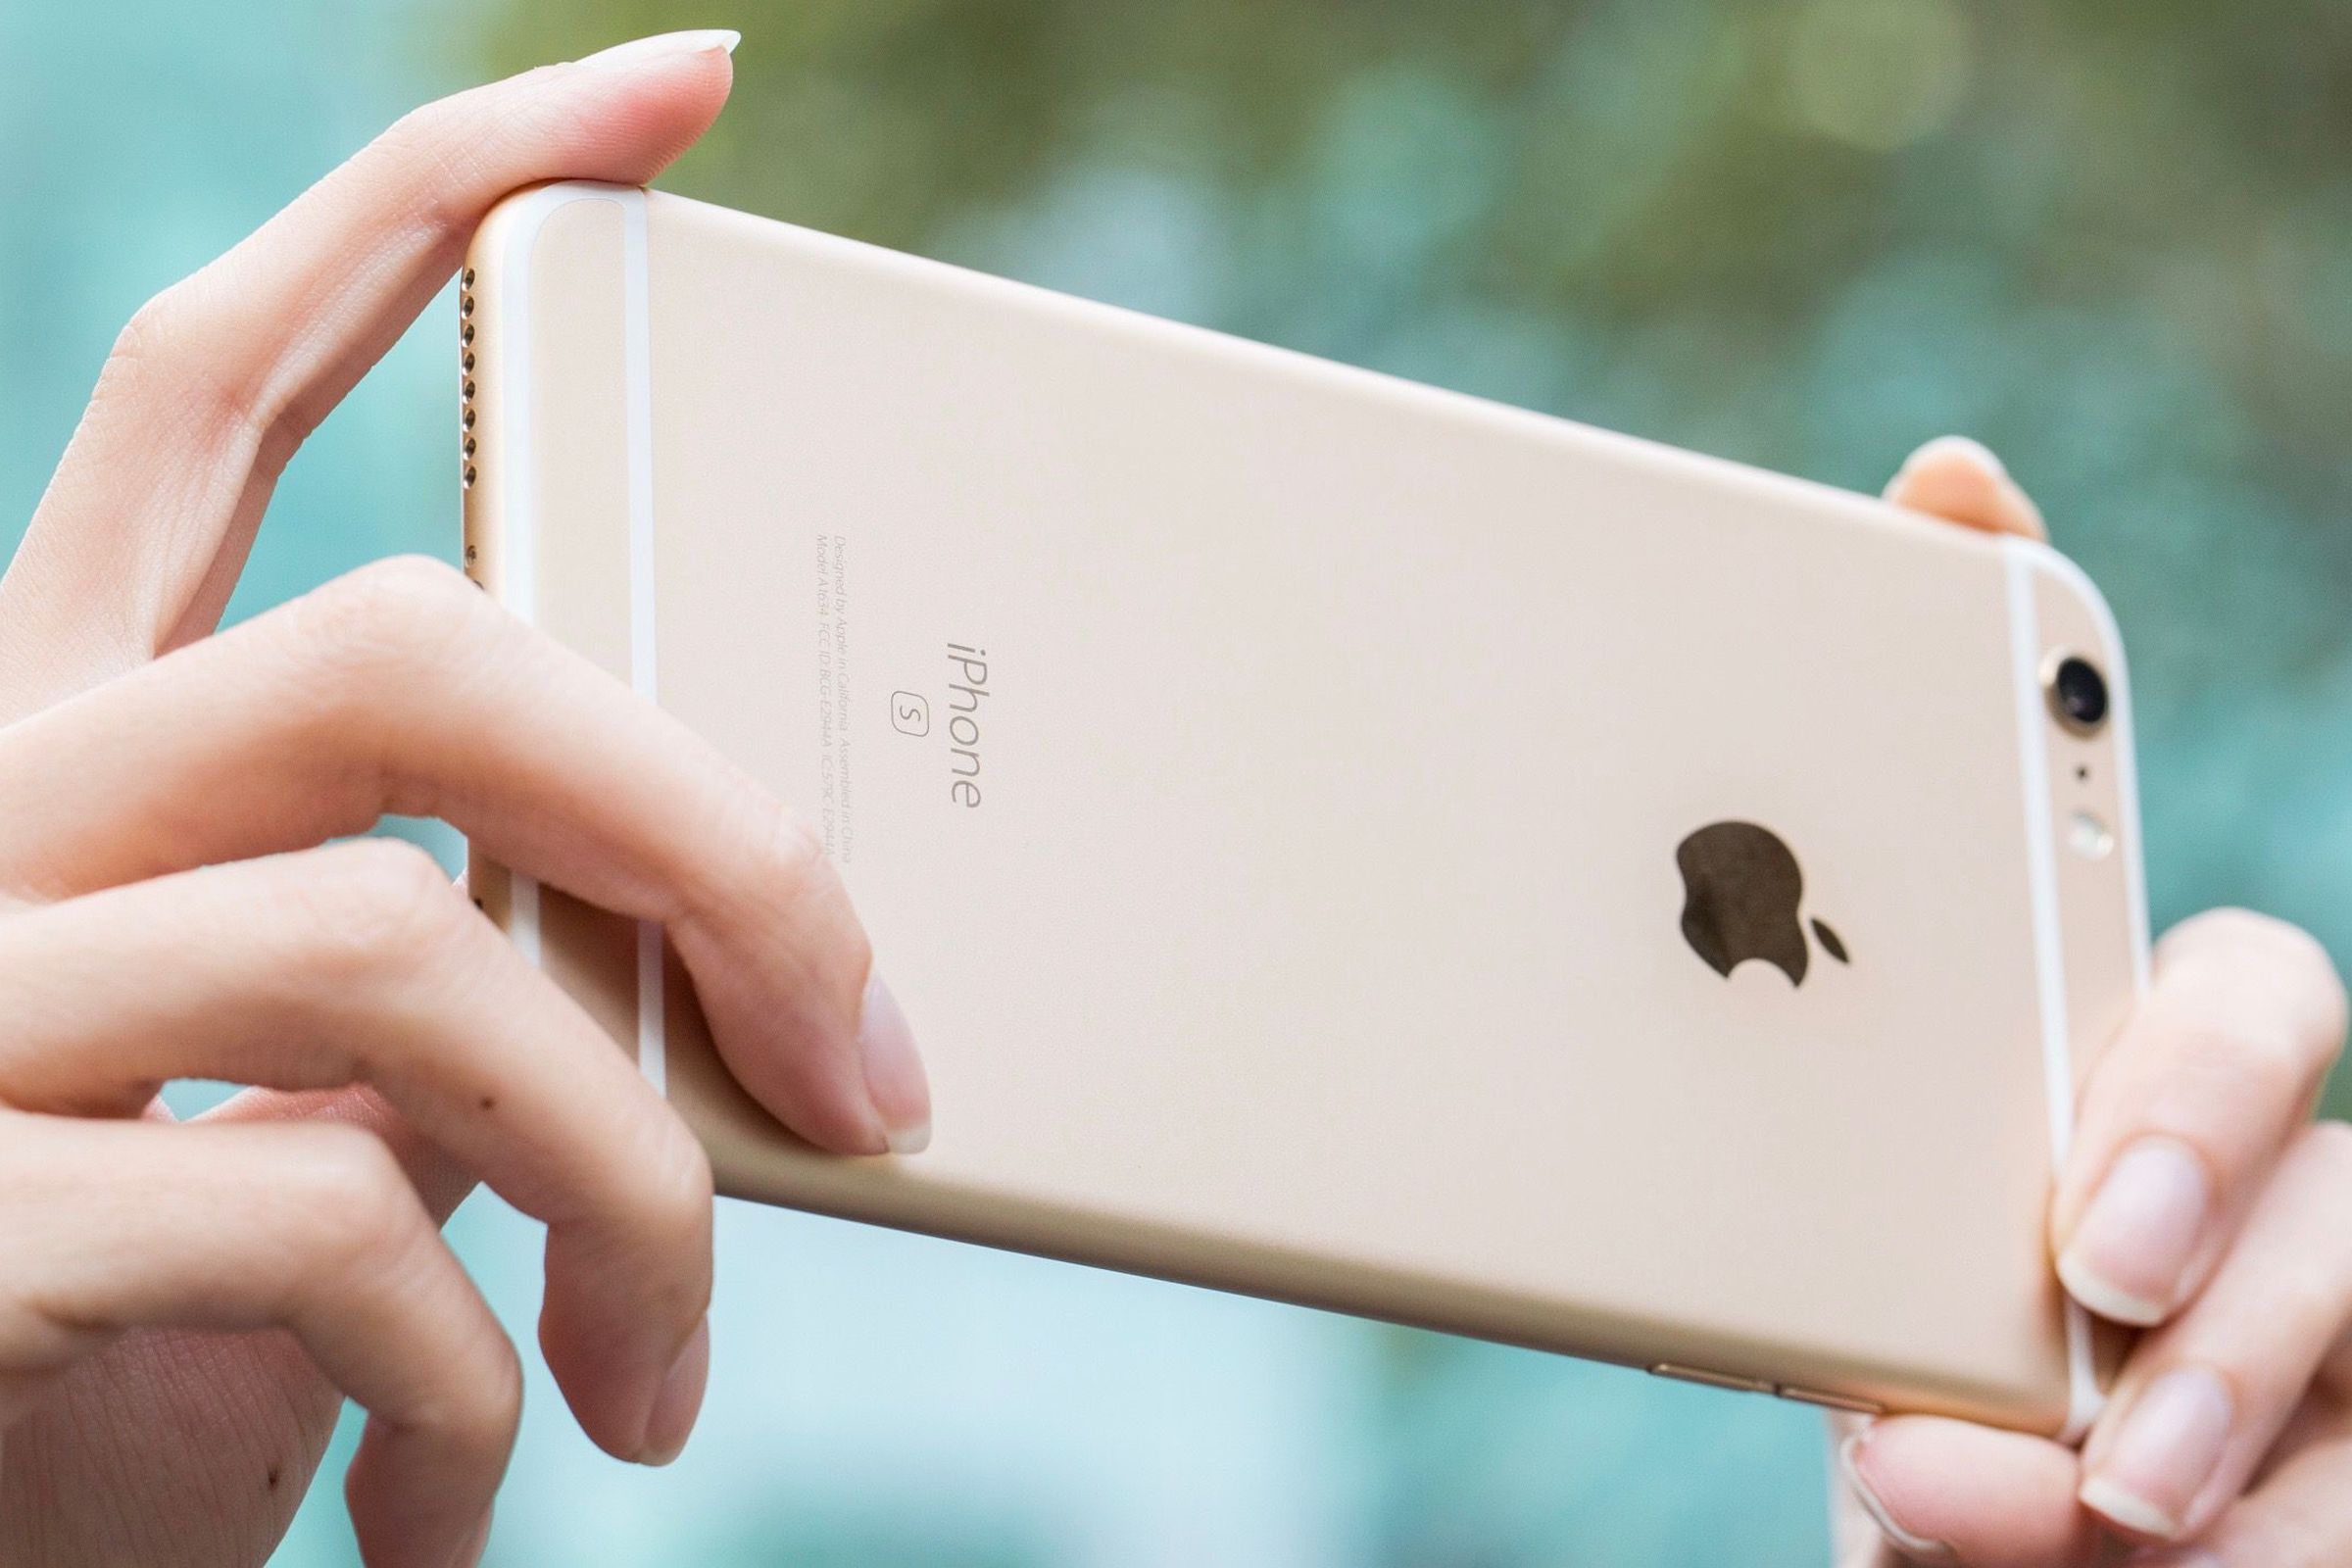 The iPhone 6S and 6S Plus arrived in September 2015 running iOS 9.